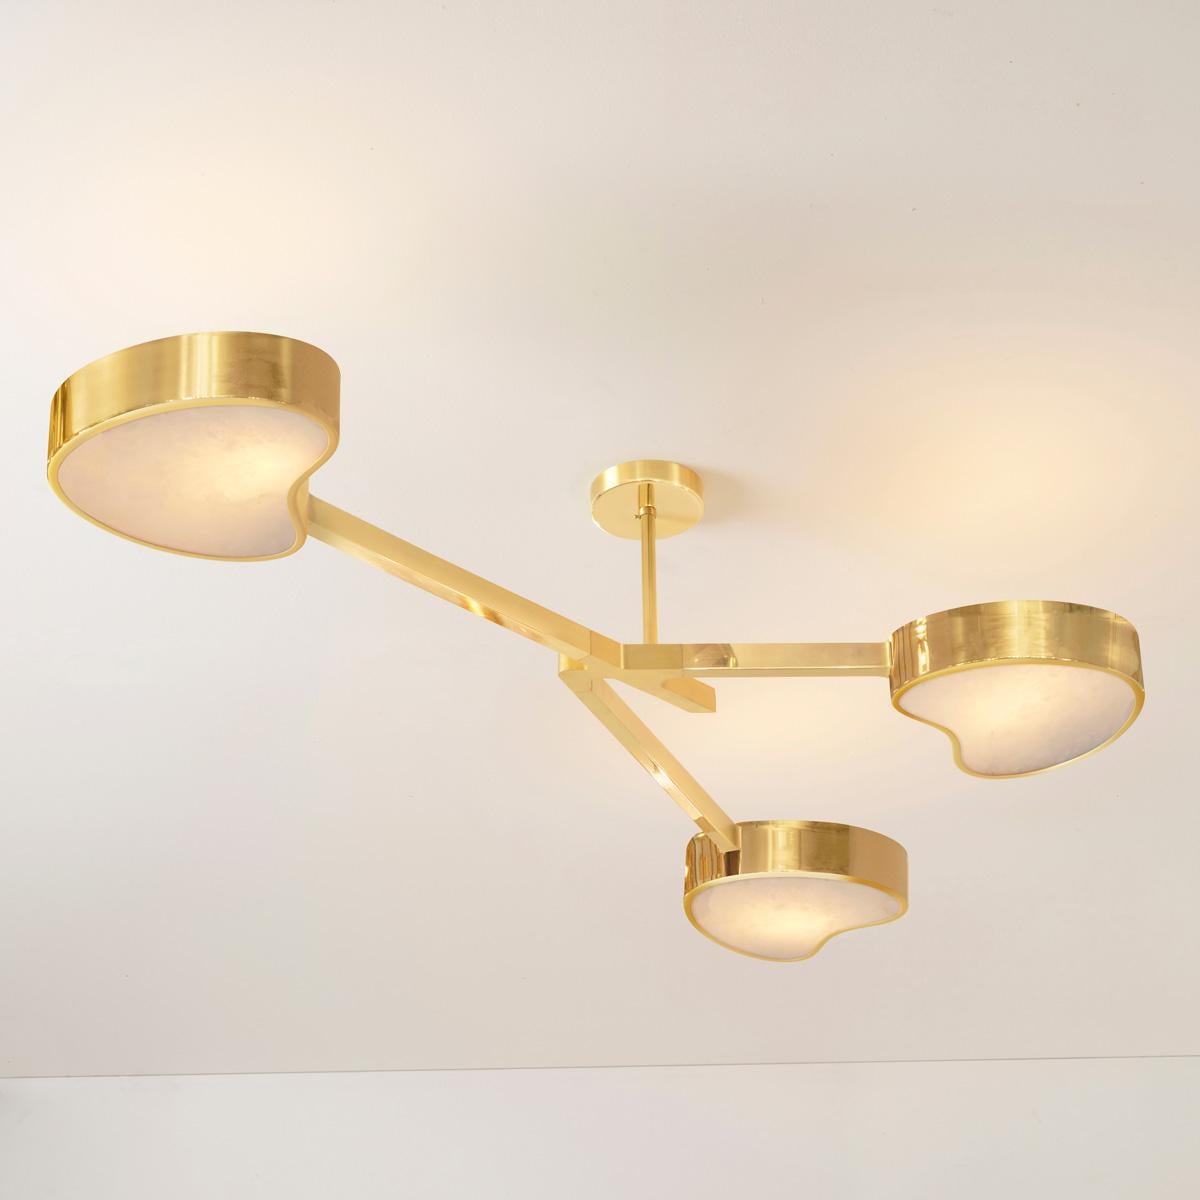 Cuore N.3 Ceiling Light by Gaspare Asaro. Satin Brass and Sand White For Sale 5